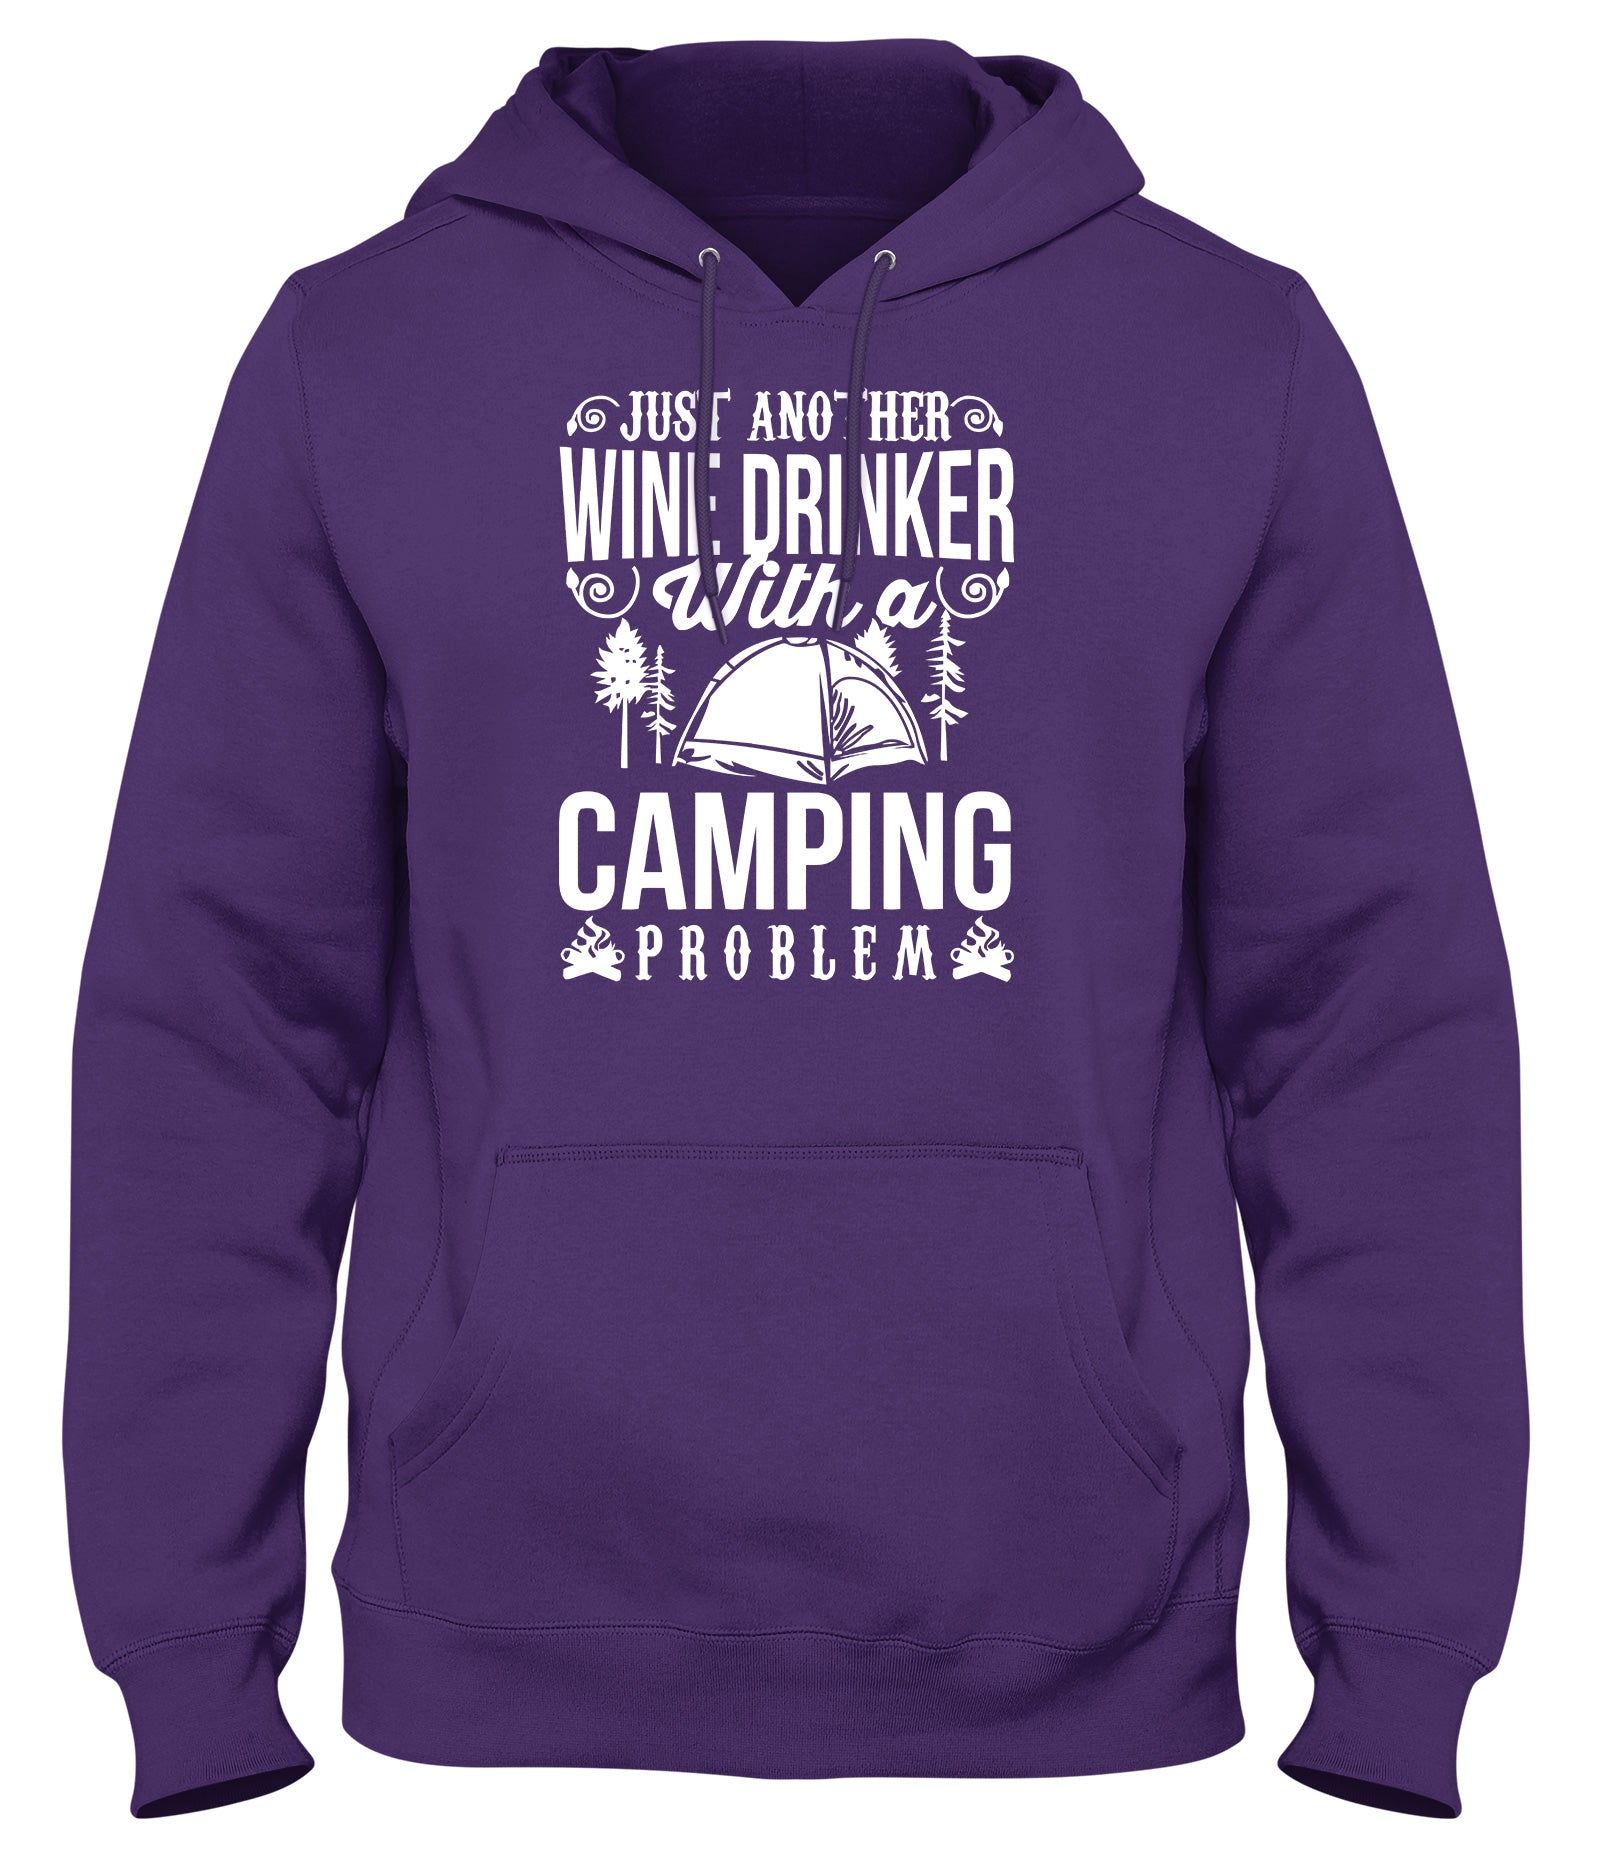 JUST ANOTHER WINE DRINKER WITH A CAMPING PROBLEM MENS WOMENS LADIES UNISEX FUNNY SLOGAN HOODIE